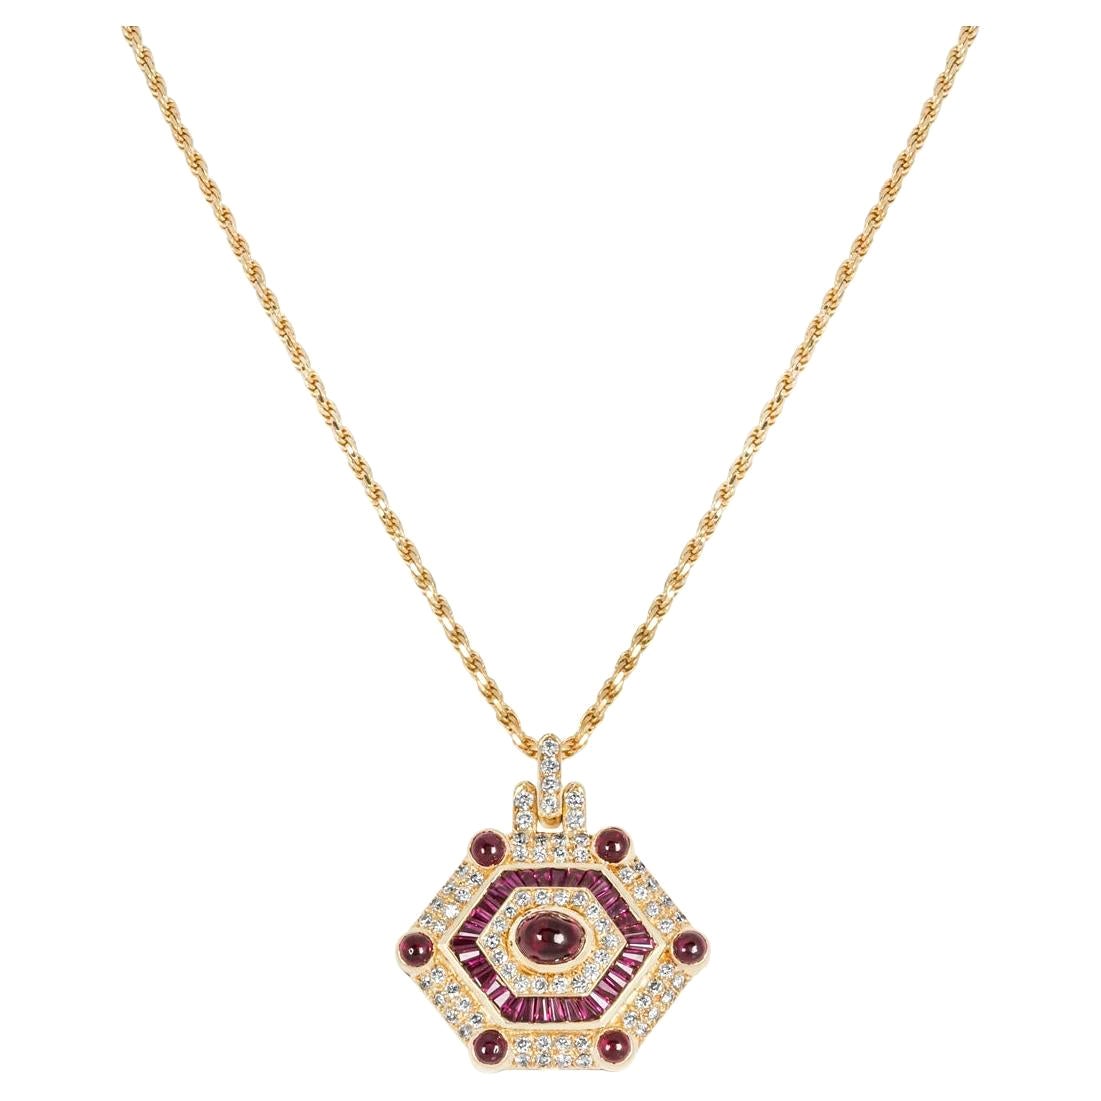 A beautiful 18k yellow gold ruby and diamond pendant. The necklace consists of a diamond set bail with a bezel set ruby at the centre leading to a shield-shaped pendant. The pendant alternates between round brilliant cut diamonds, tapered baguette